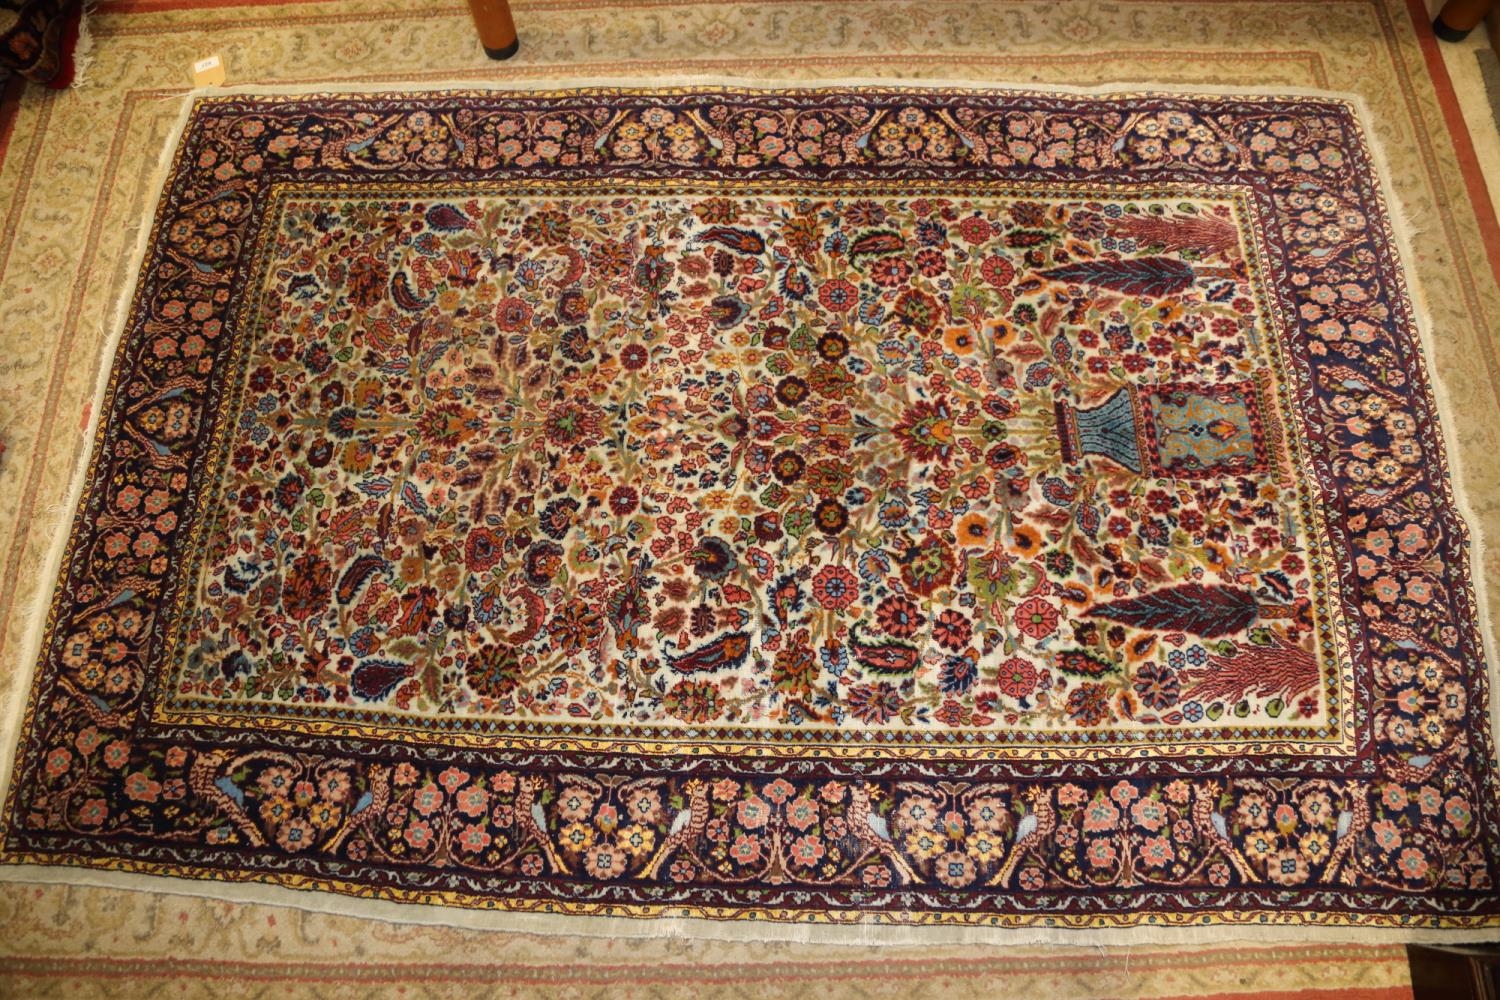 A Persian part silk pile tree and vase design rug on a light ground and multi-bordered in shades